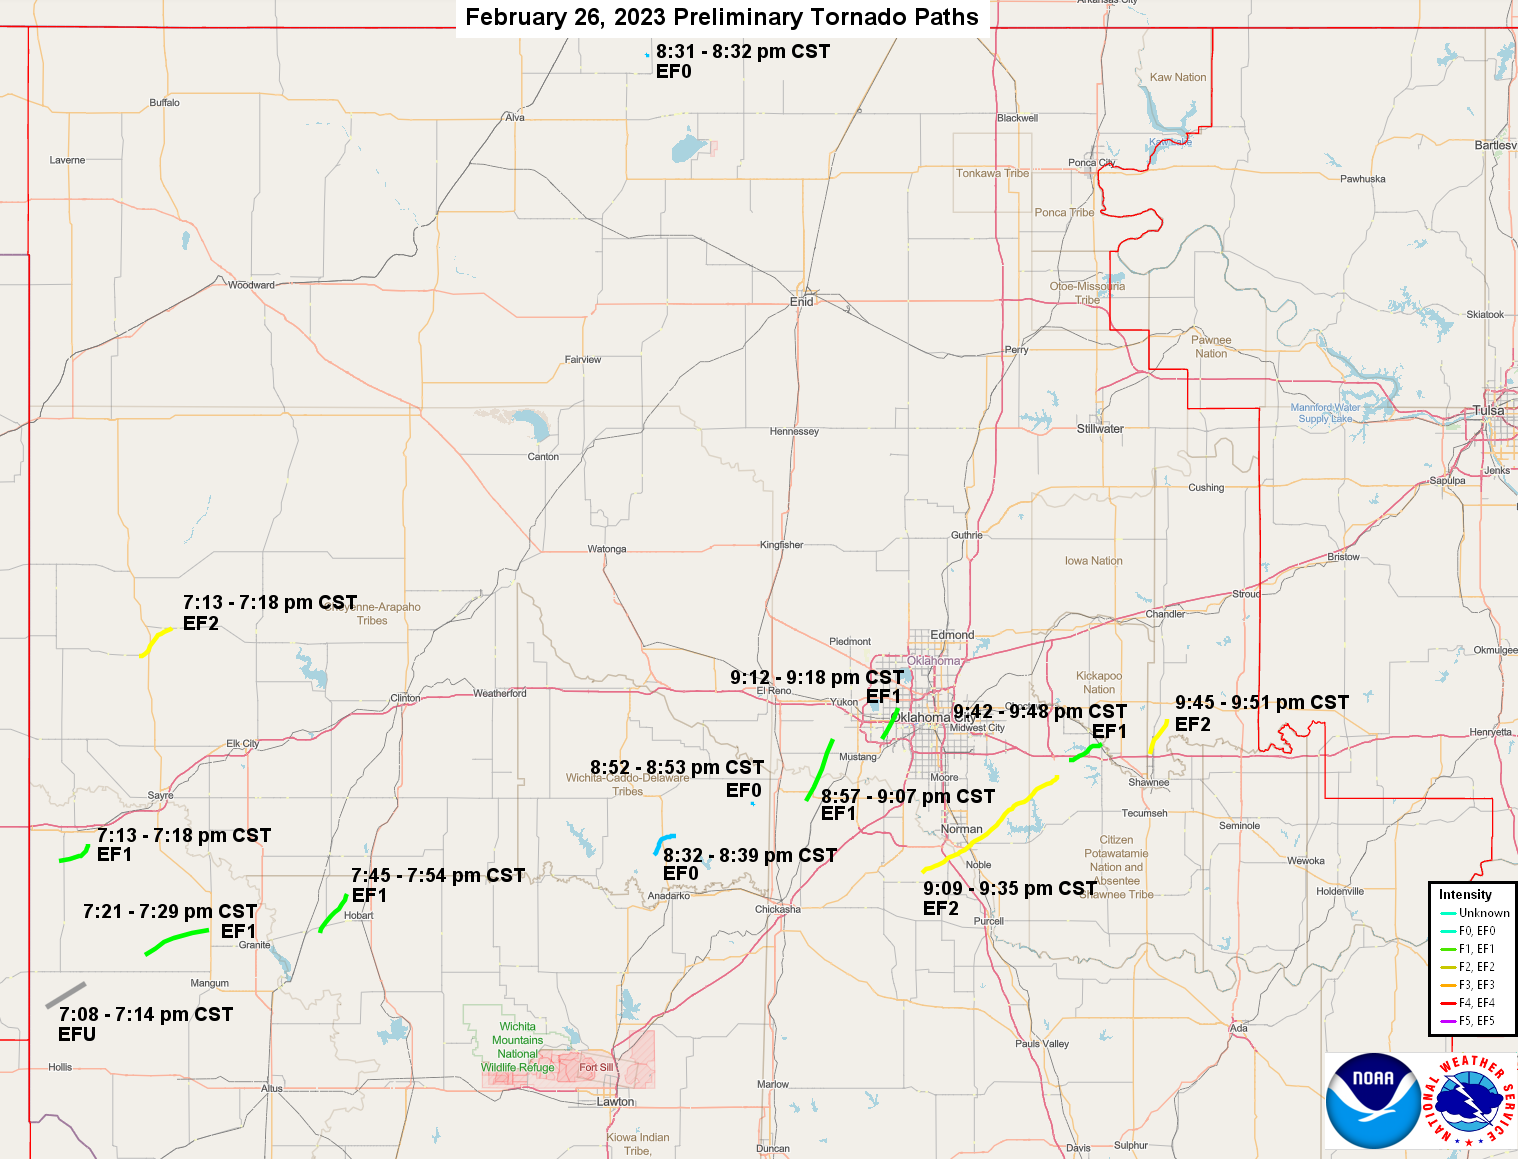 Areas Where Storm Surveys Were Conducted on February 27, 2023 and 5 Tornadoes Were Confirmed